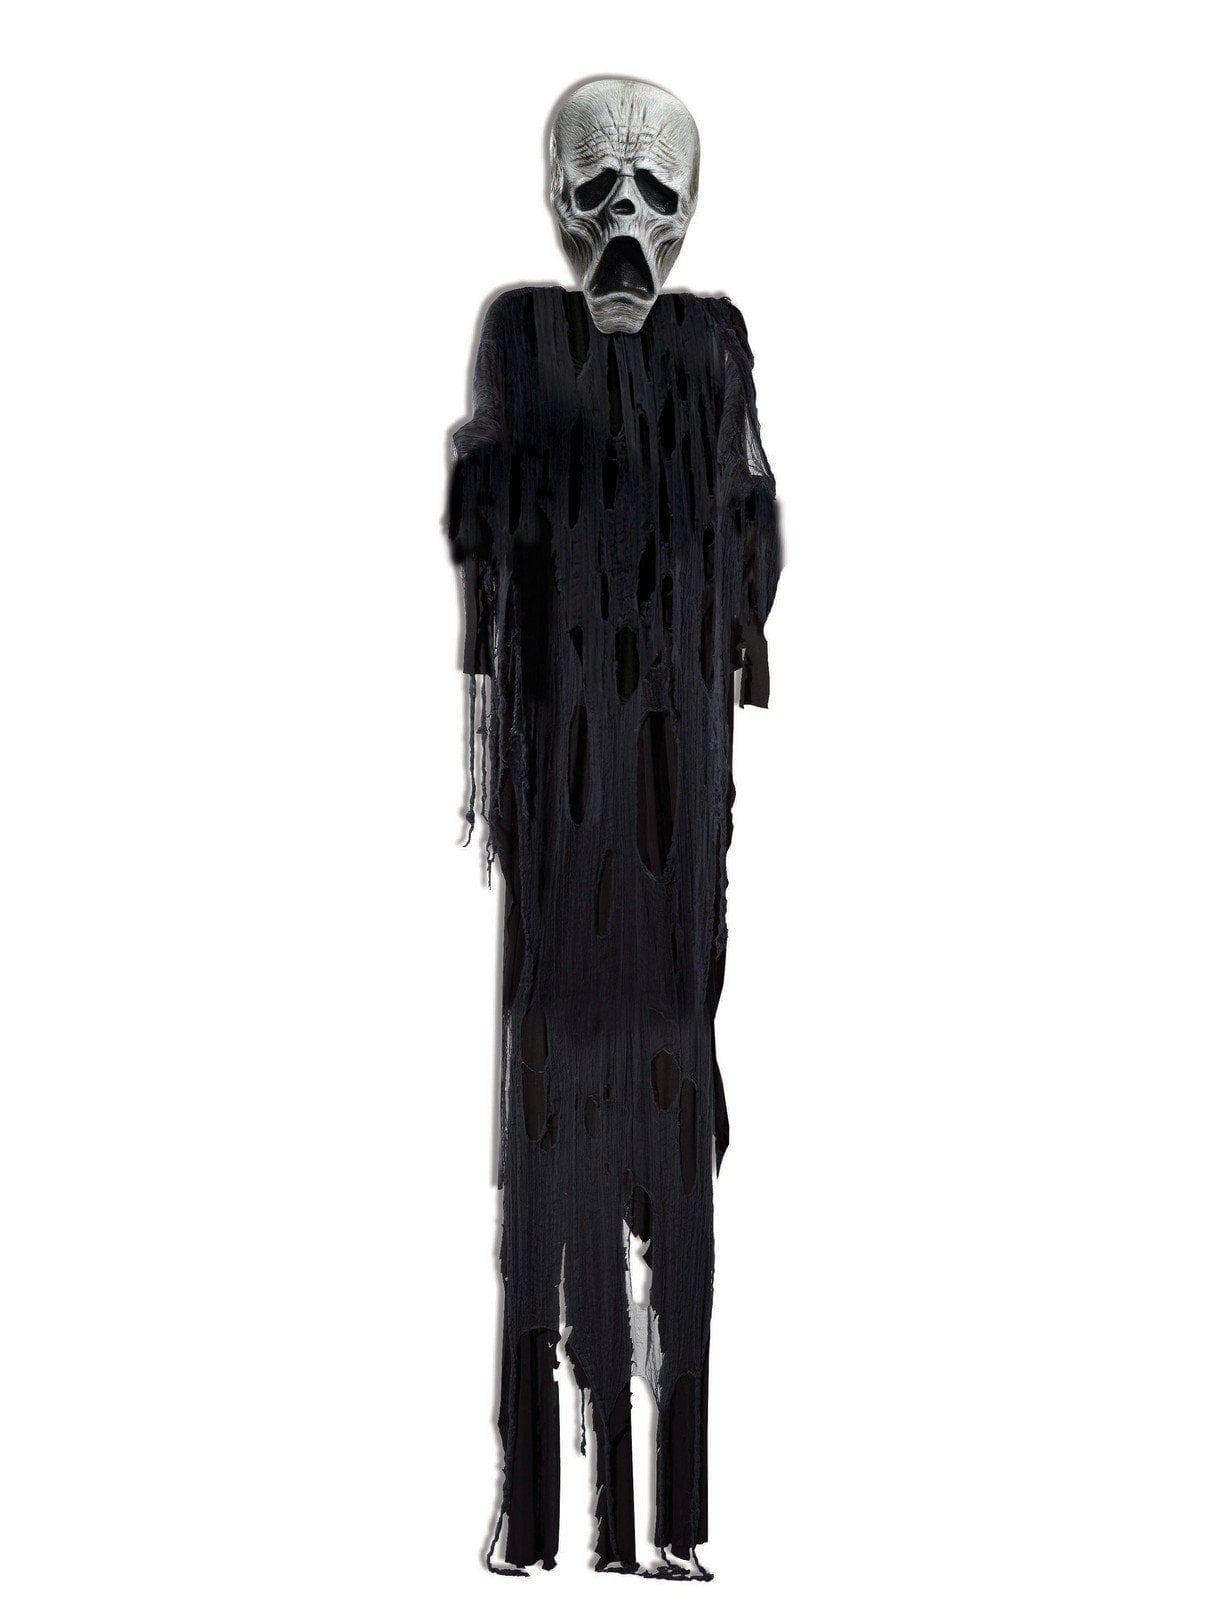 12 Ft Hanging Groom Ghost - costumes.com